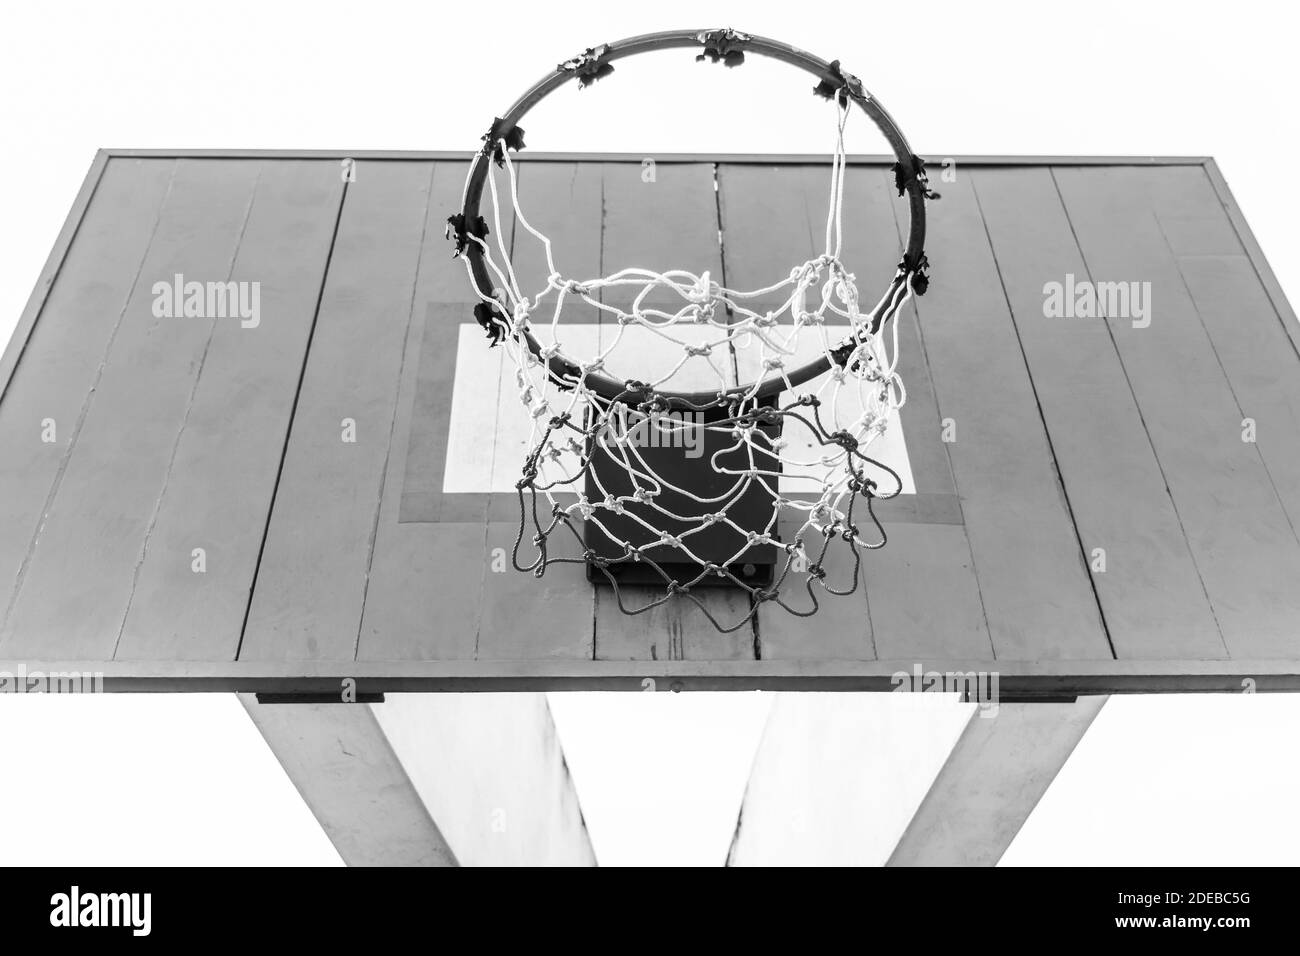 Old basketball court Black and White Stock Photos & Images - Alamy